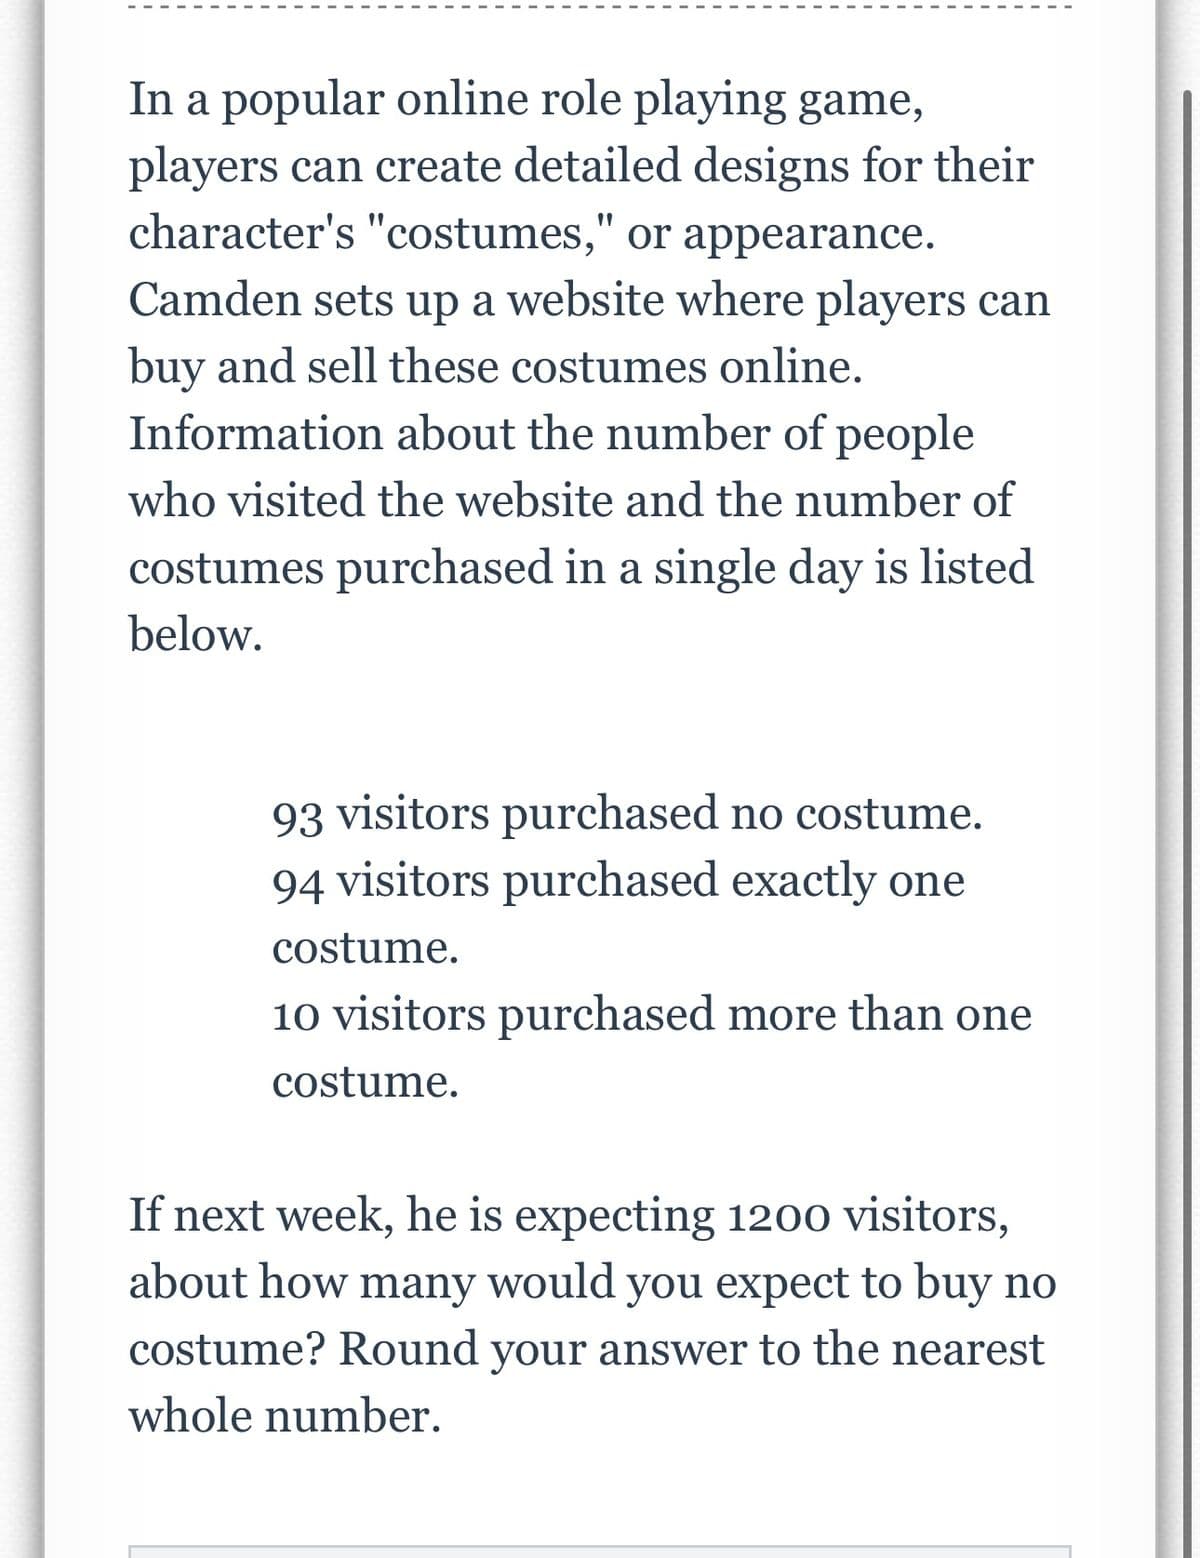 In a popular online role playing game,
players can create detailed designs for their
character's "costumes," or appearance.
Camden sets up a website where players can
buy and sell these costumes online.
Information about the number of people
who visited the website and the number of
costumes purchased in a single day is listed
below.
93 visitors purchased no costume.
94 visitors purchased exactly one
costume.
10 visitors purchased more than one
costume.
If next week, he is expecting 1200 visitors,
about how many would you expect to buy no
costume? Round your answer to the nearest
whole number.